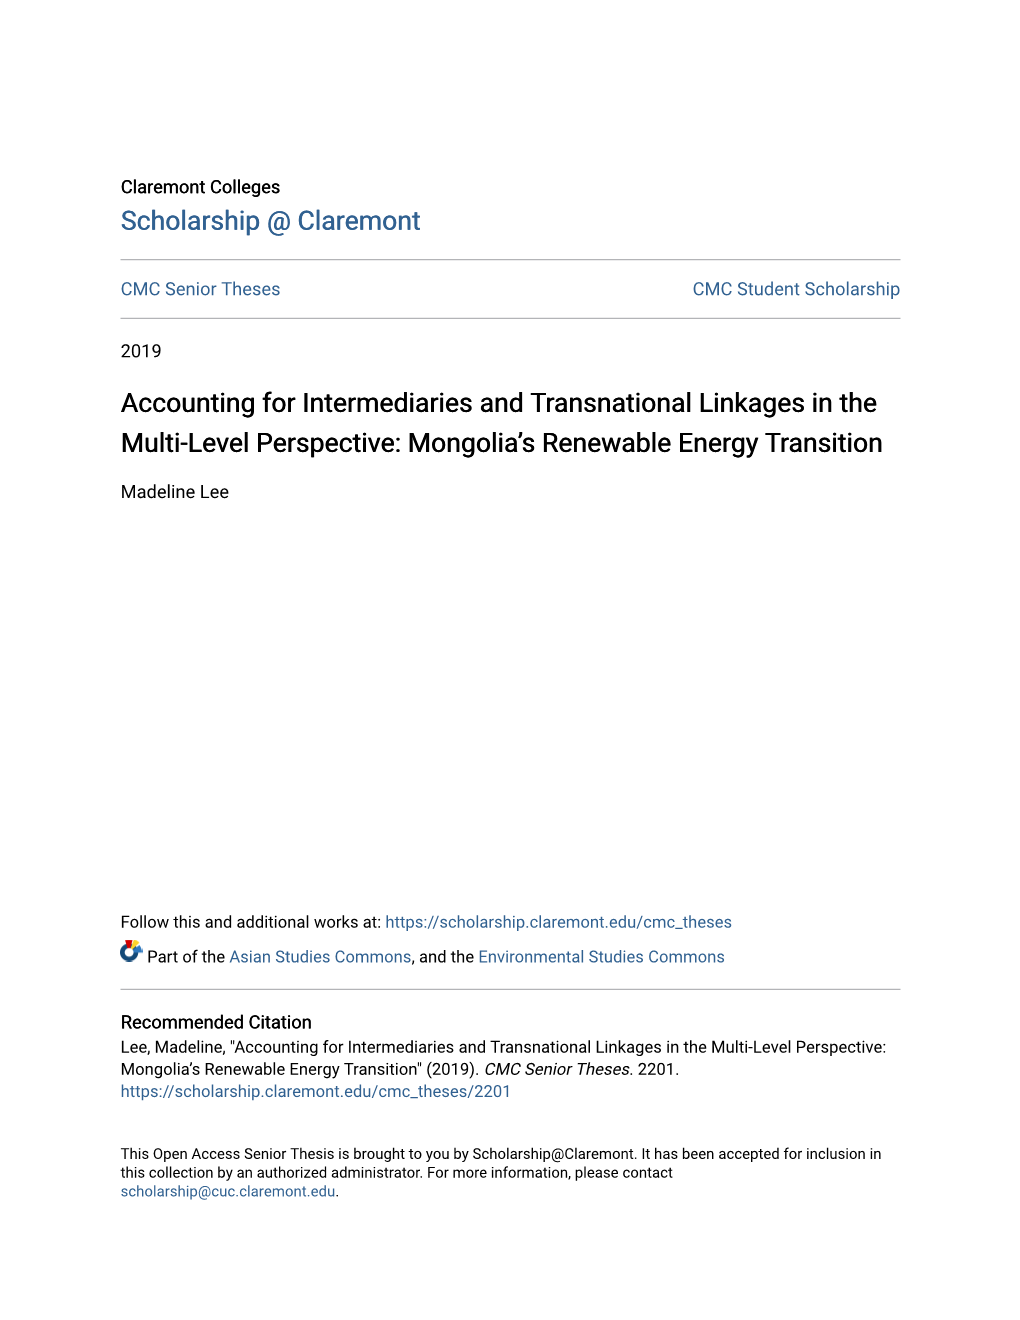 Accounting for Intermediaries and Transnational Linkages in the Multi-Level Perspective: Mongolia’S Renewable Energy Transition